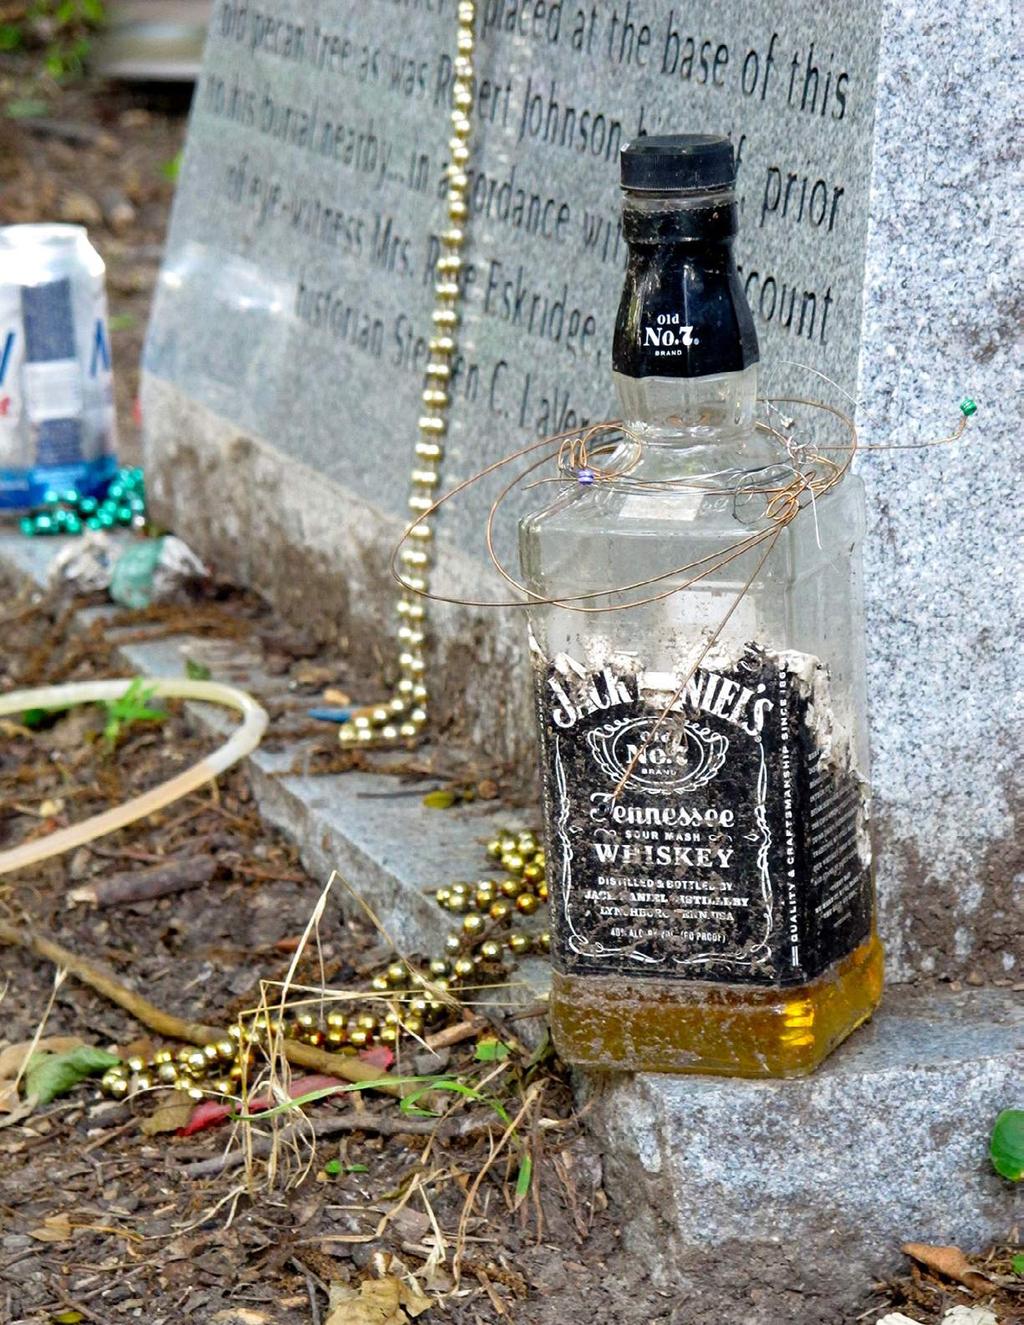 JULY 11, 2013 Fans of Robert Johnson leave gifts like Jack Daniels, beads, beer, glow sticks and guitar picks for the